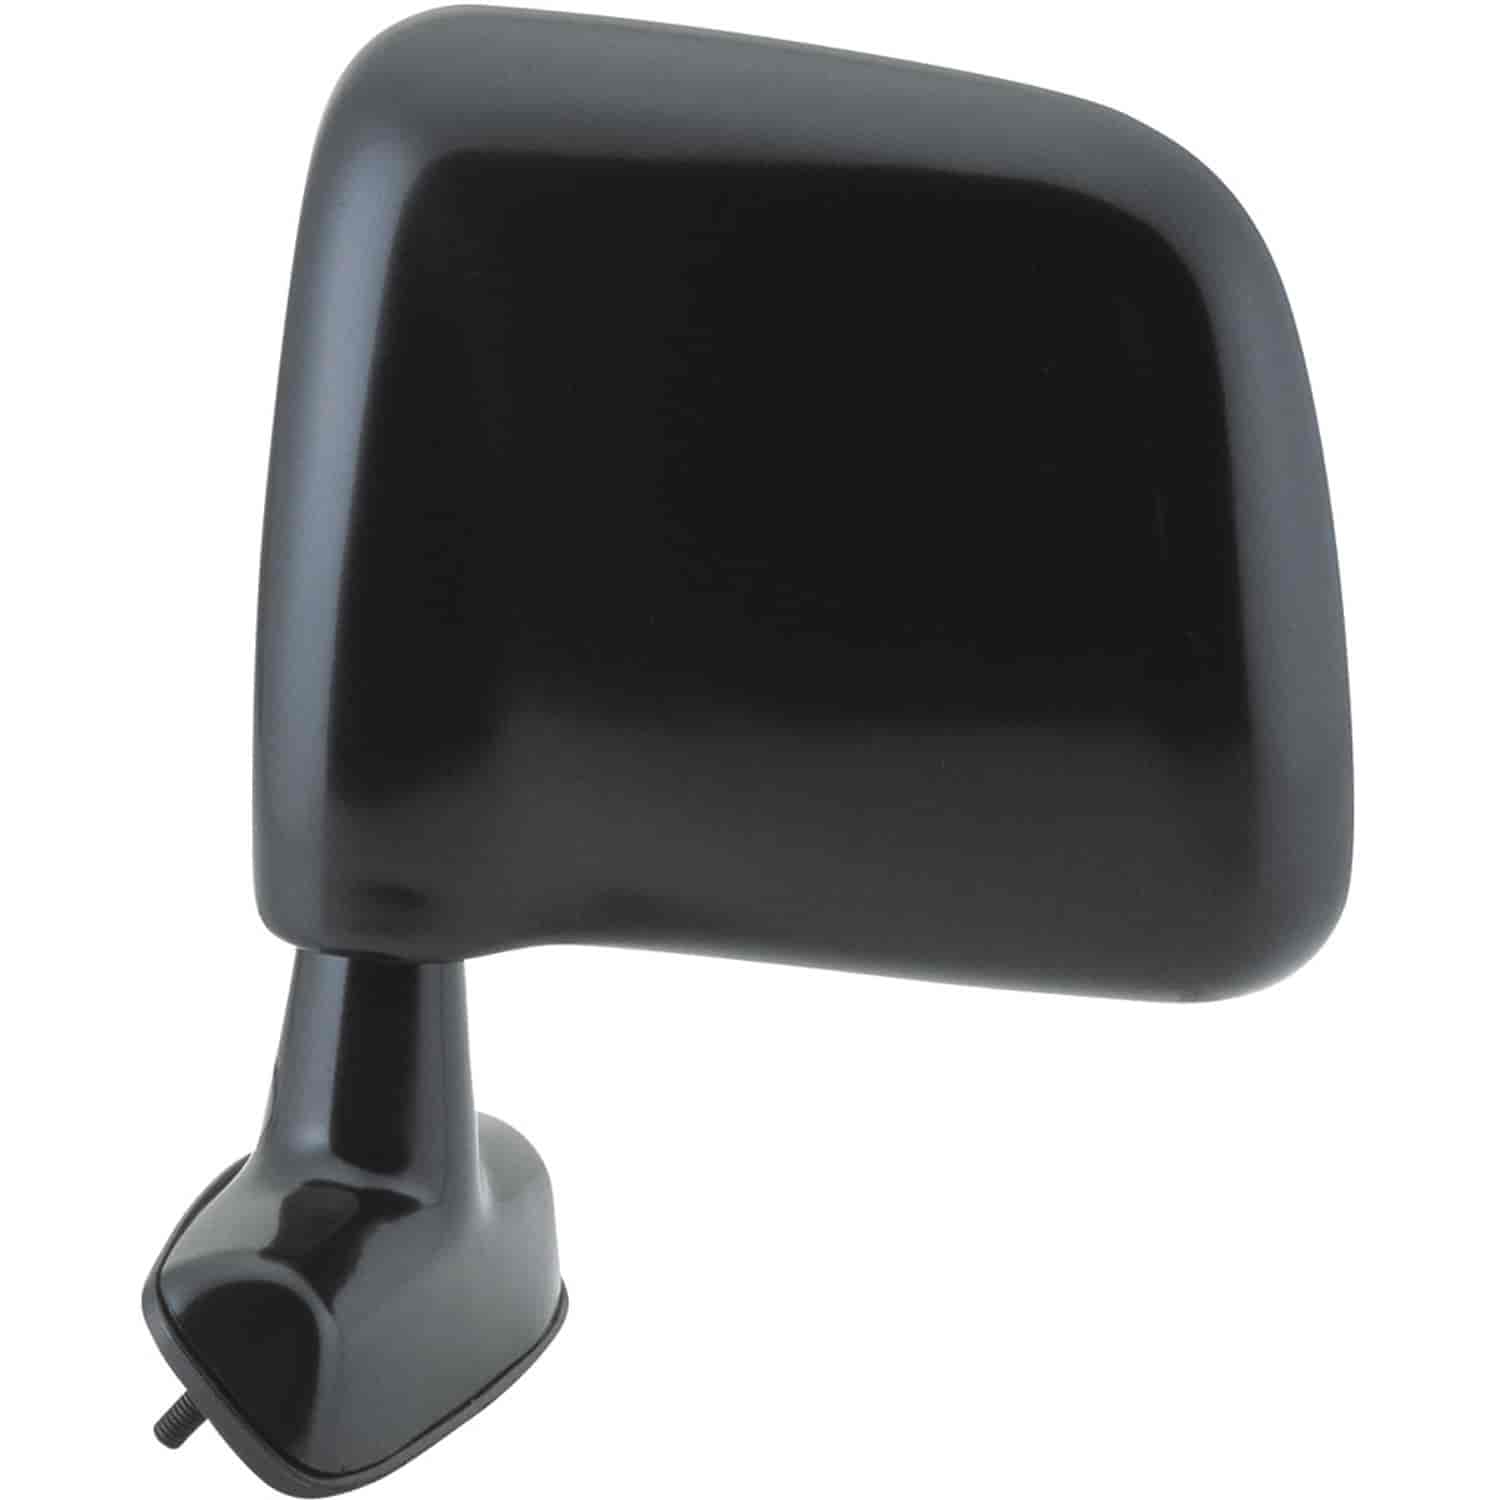 OEM Style Replacement mirror for 86-97 Ford Aerostar